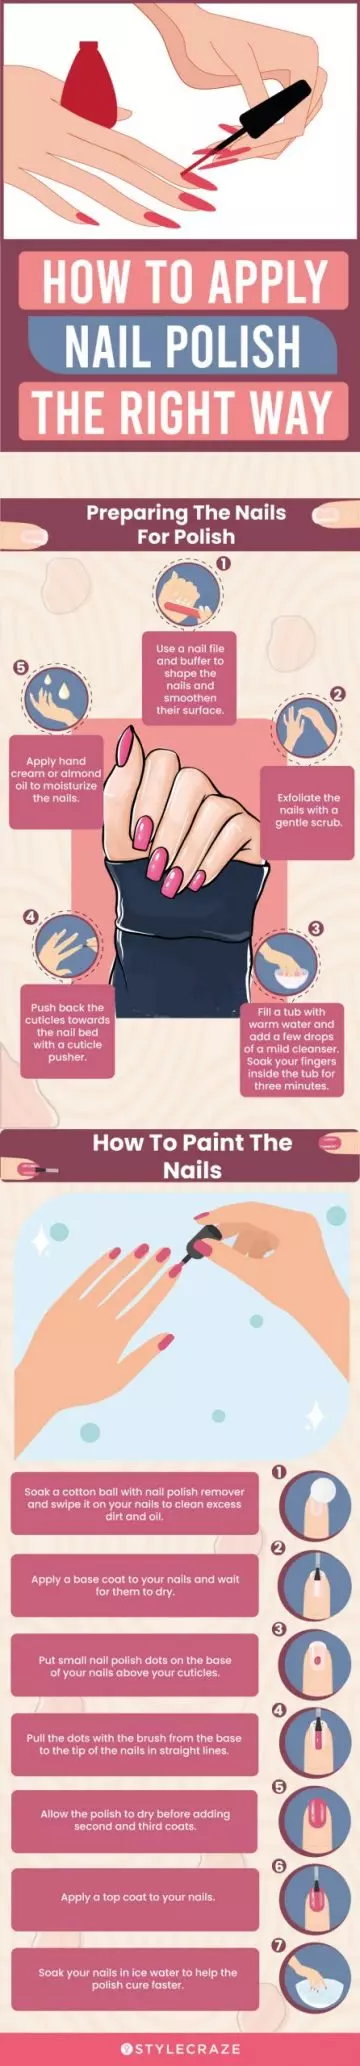 How To Apply A Nail Polish Correctly (infographic)